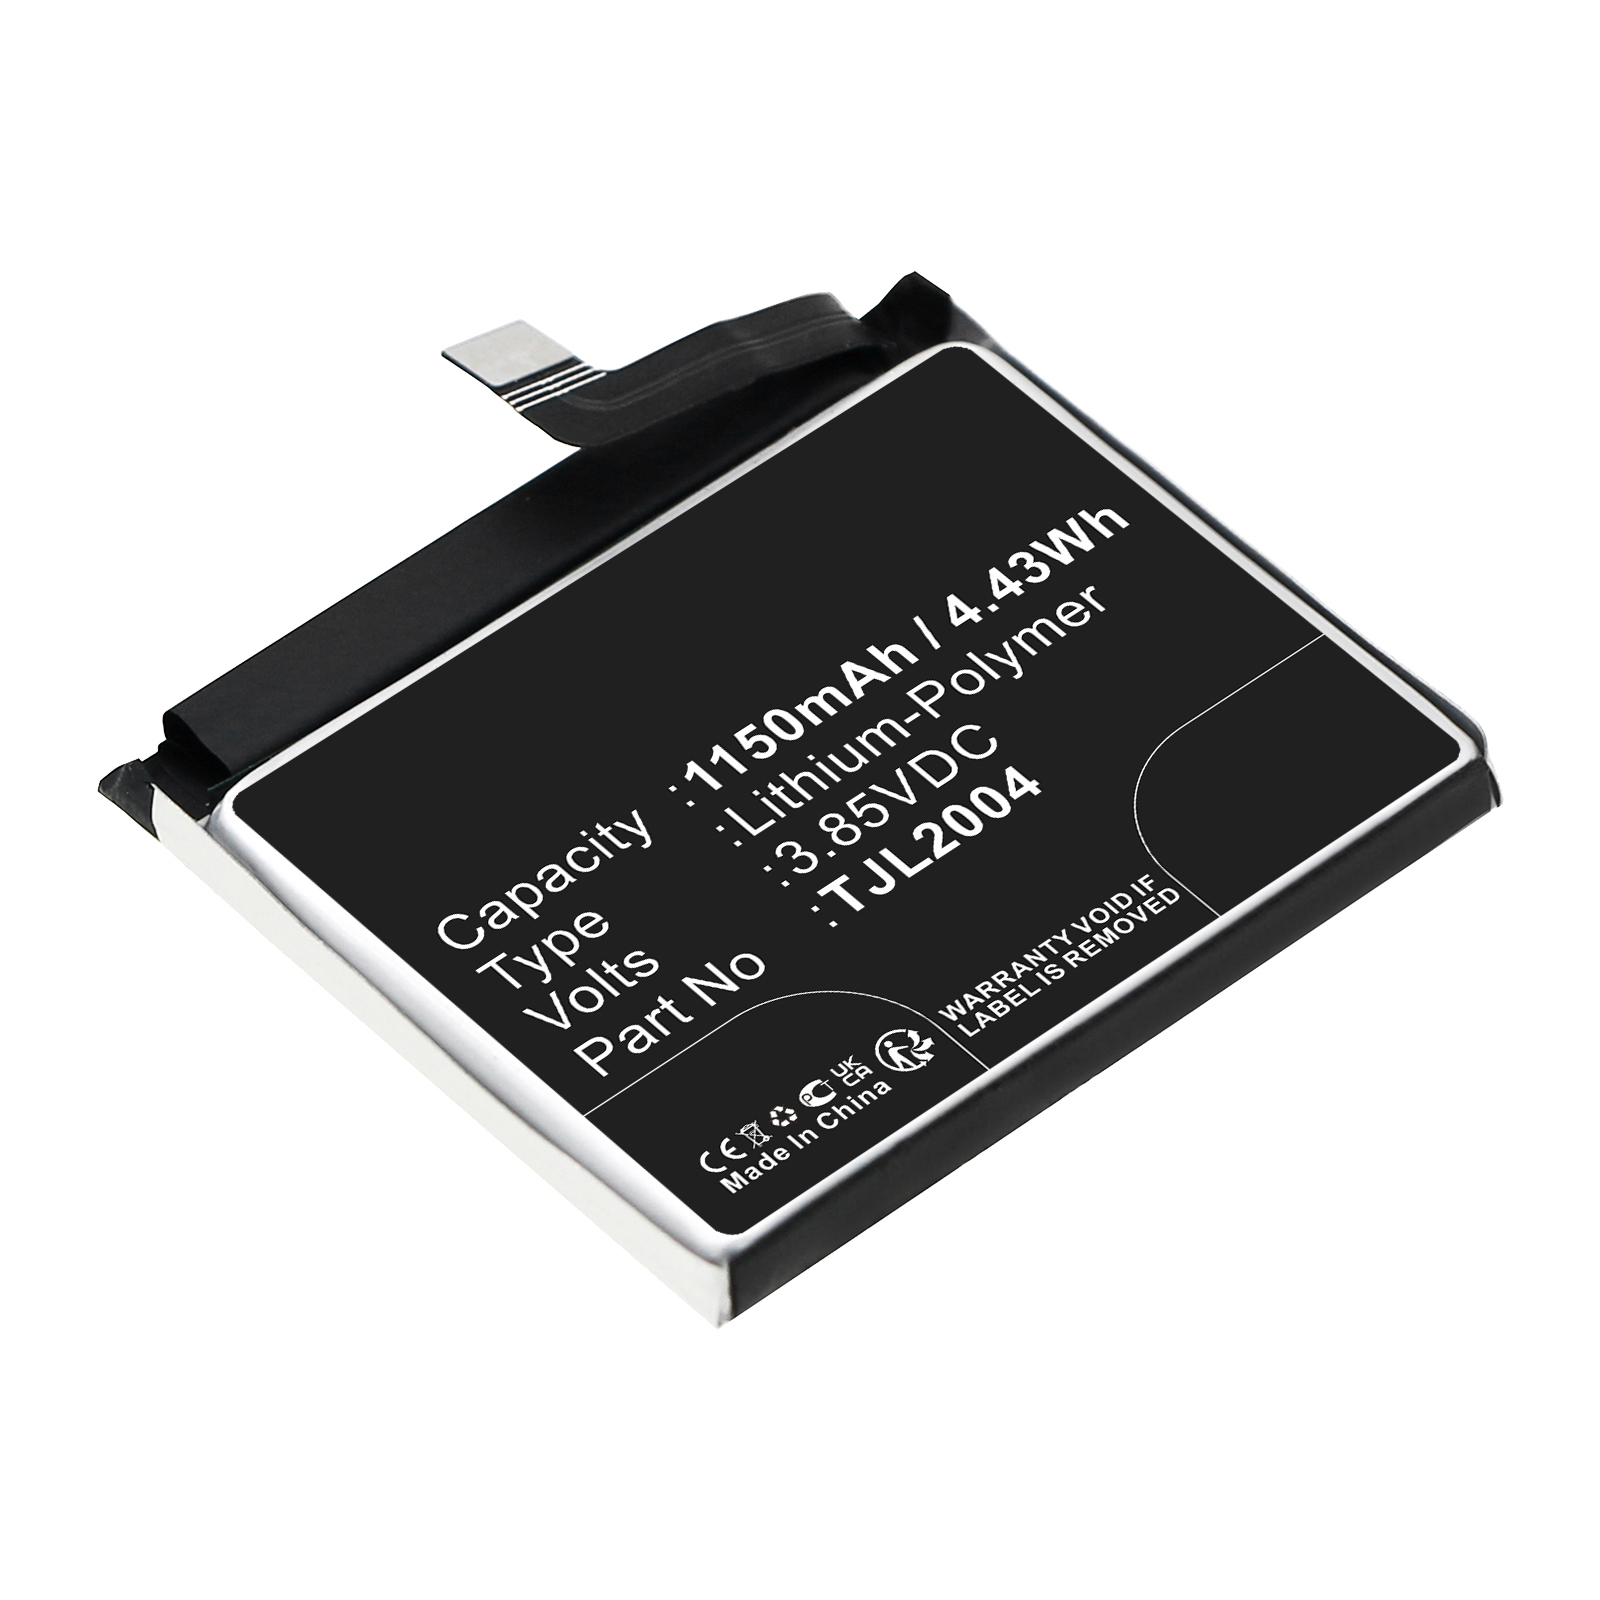 Synergy Digital Cell Phone Battery, Compatible with Wiko TJL2004 Cell Phone Battery (Li-Pol, 3.85V, 1150mAh)